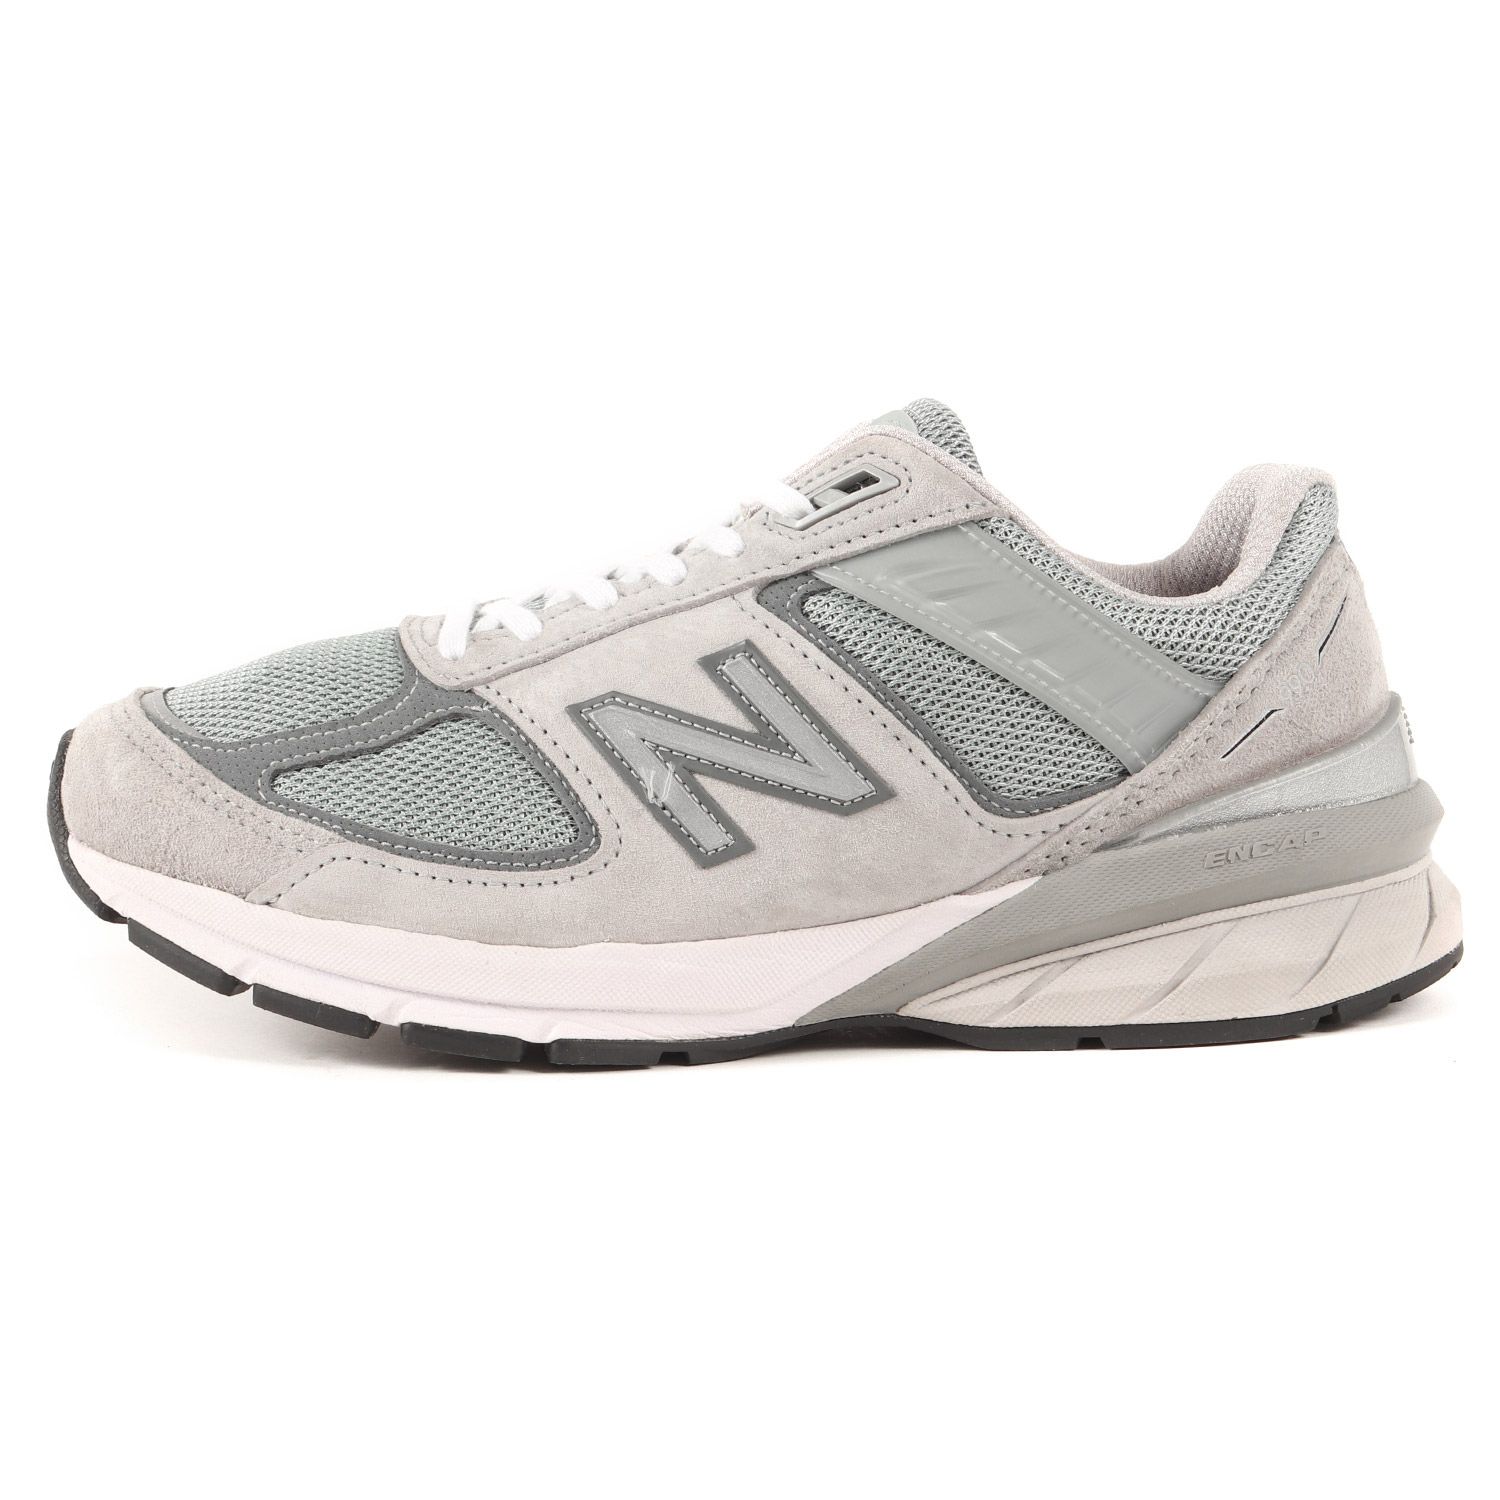 NEW BALANCE ニューバランス W990 GL5 MADE IN U.S.A 2020年製 グレー ...